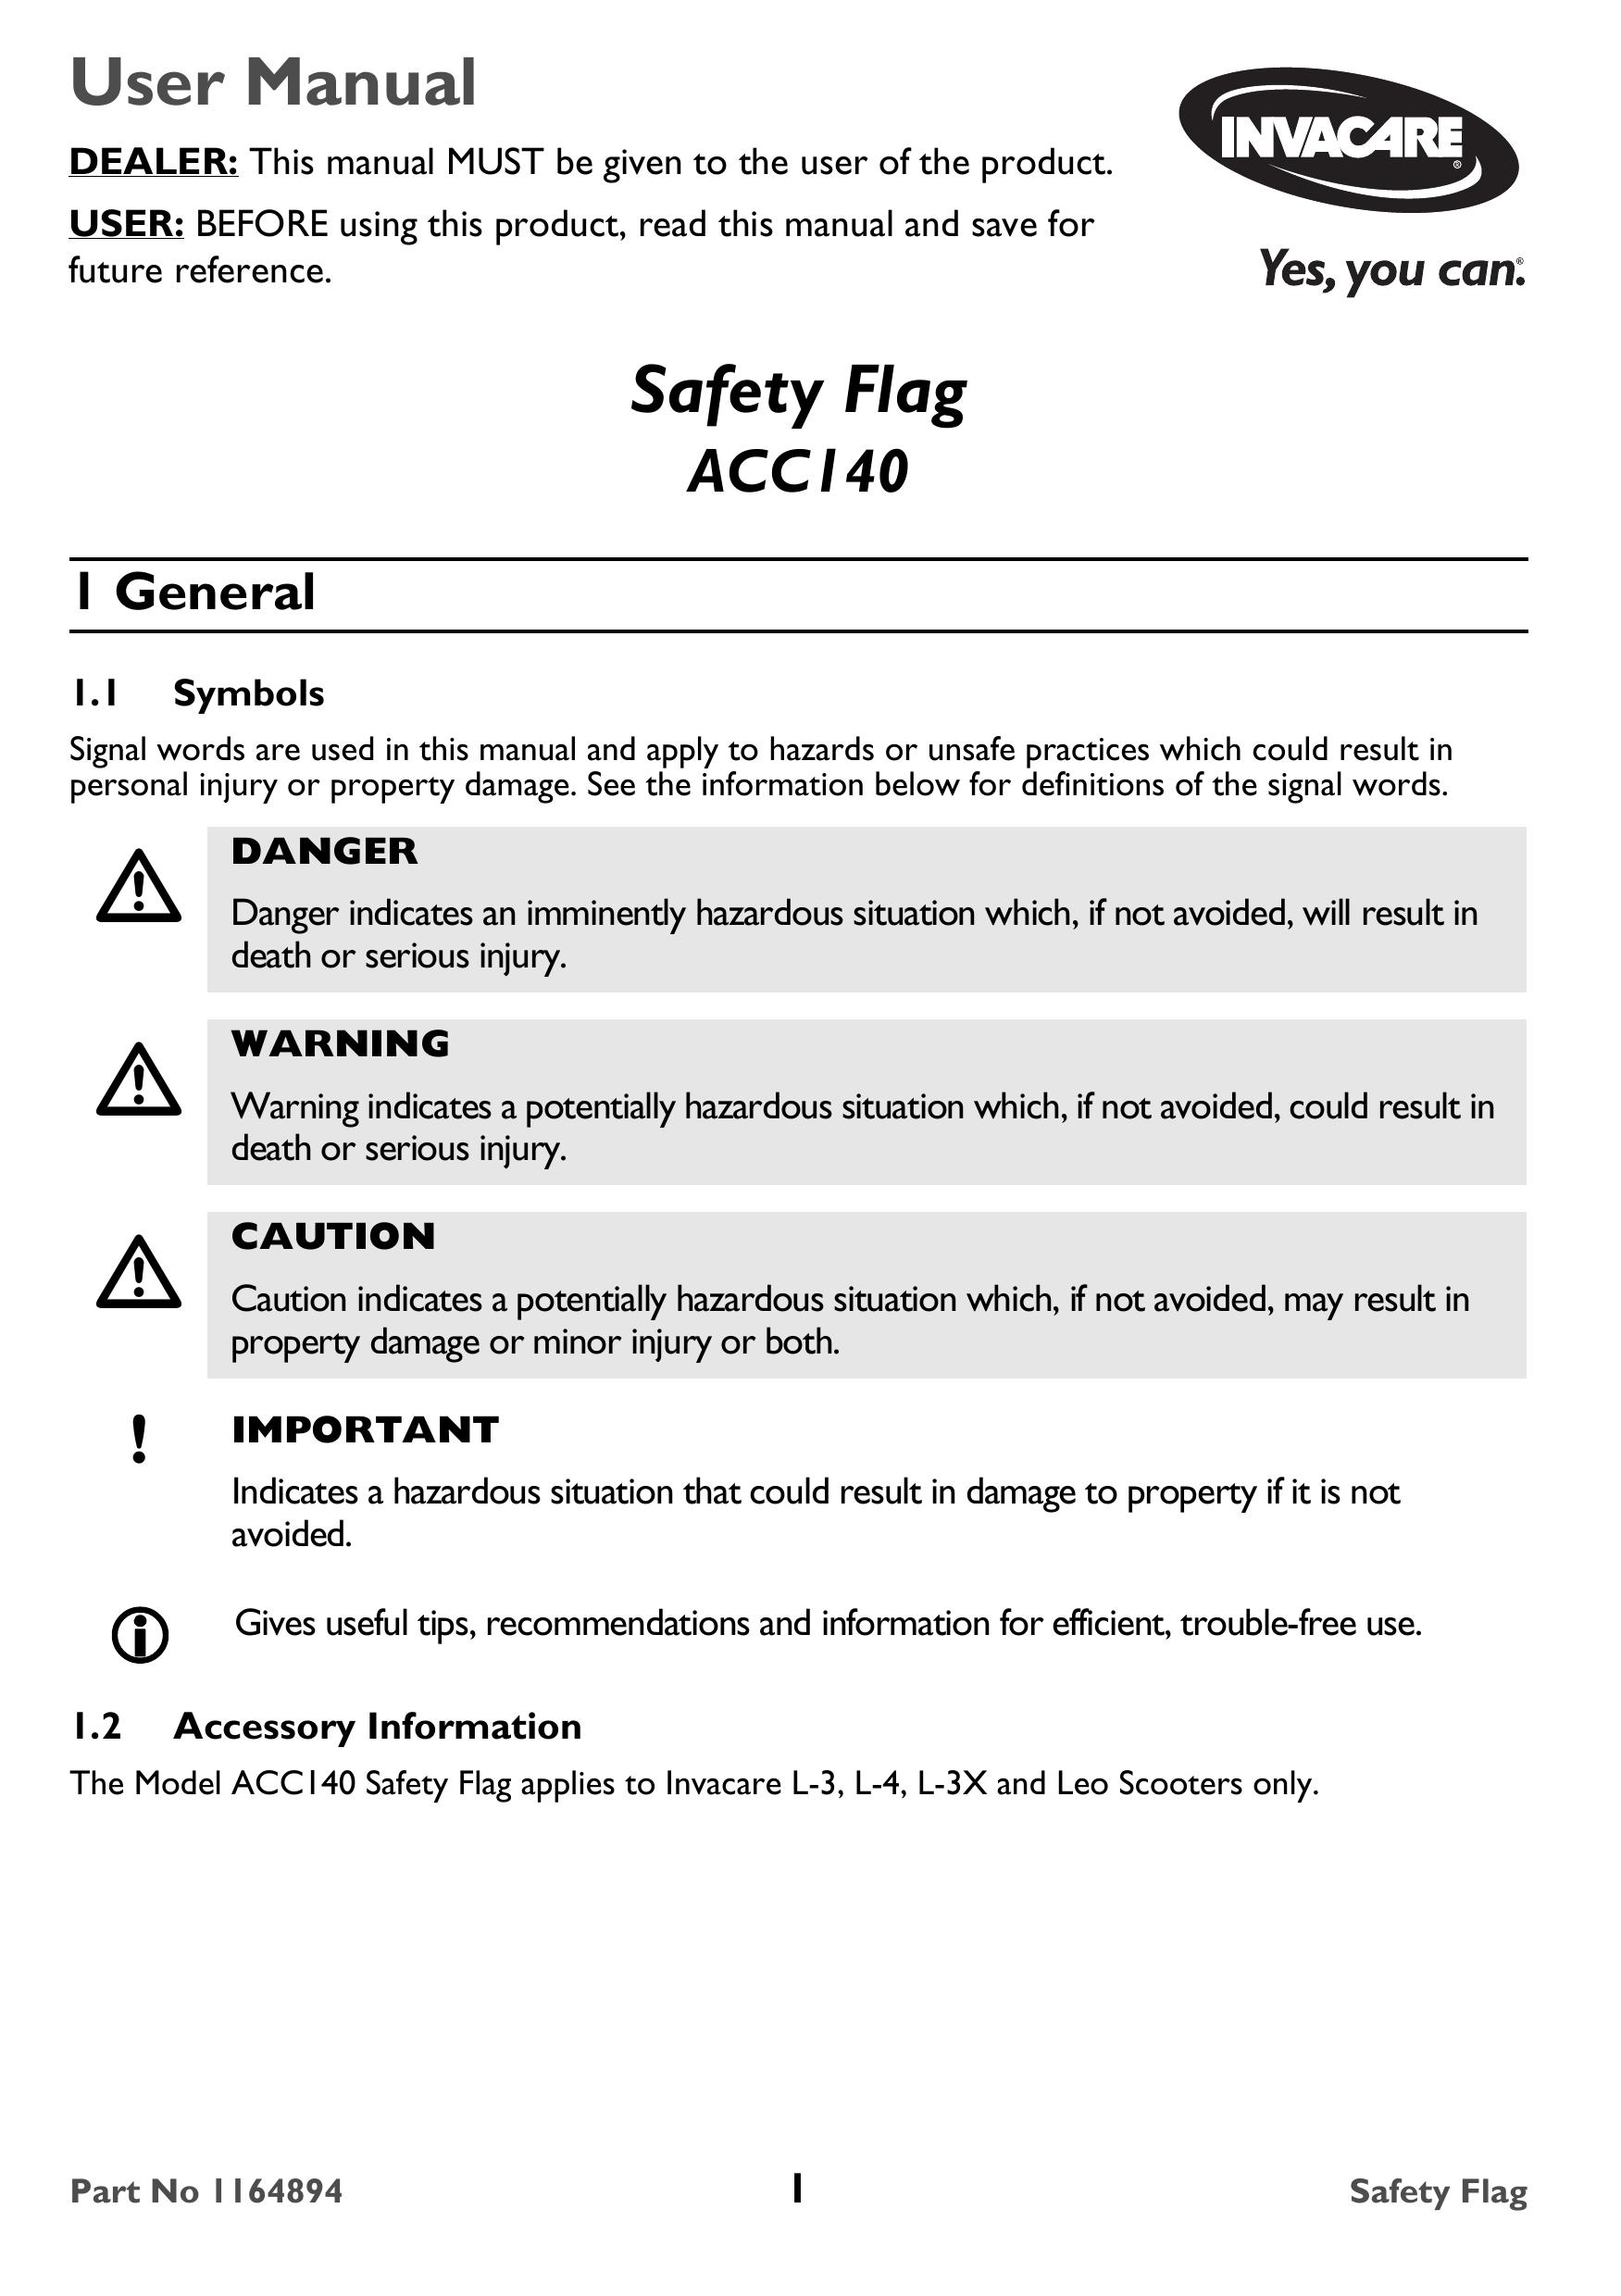 Invacare ACC140 Marine Safety Devices User Manual